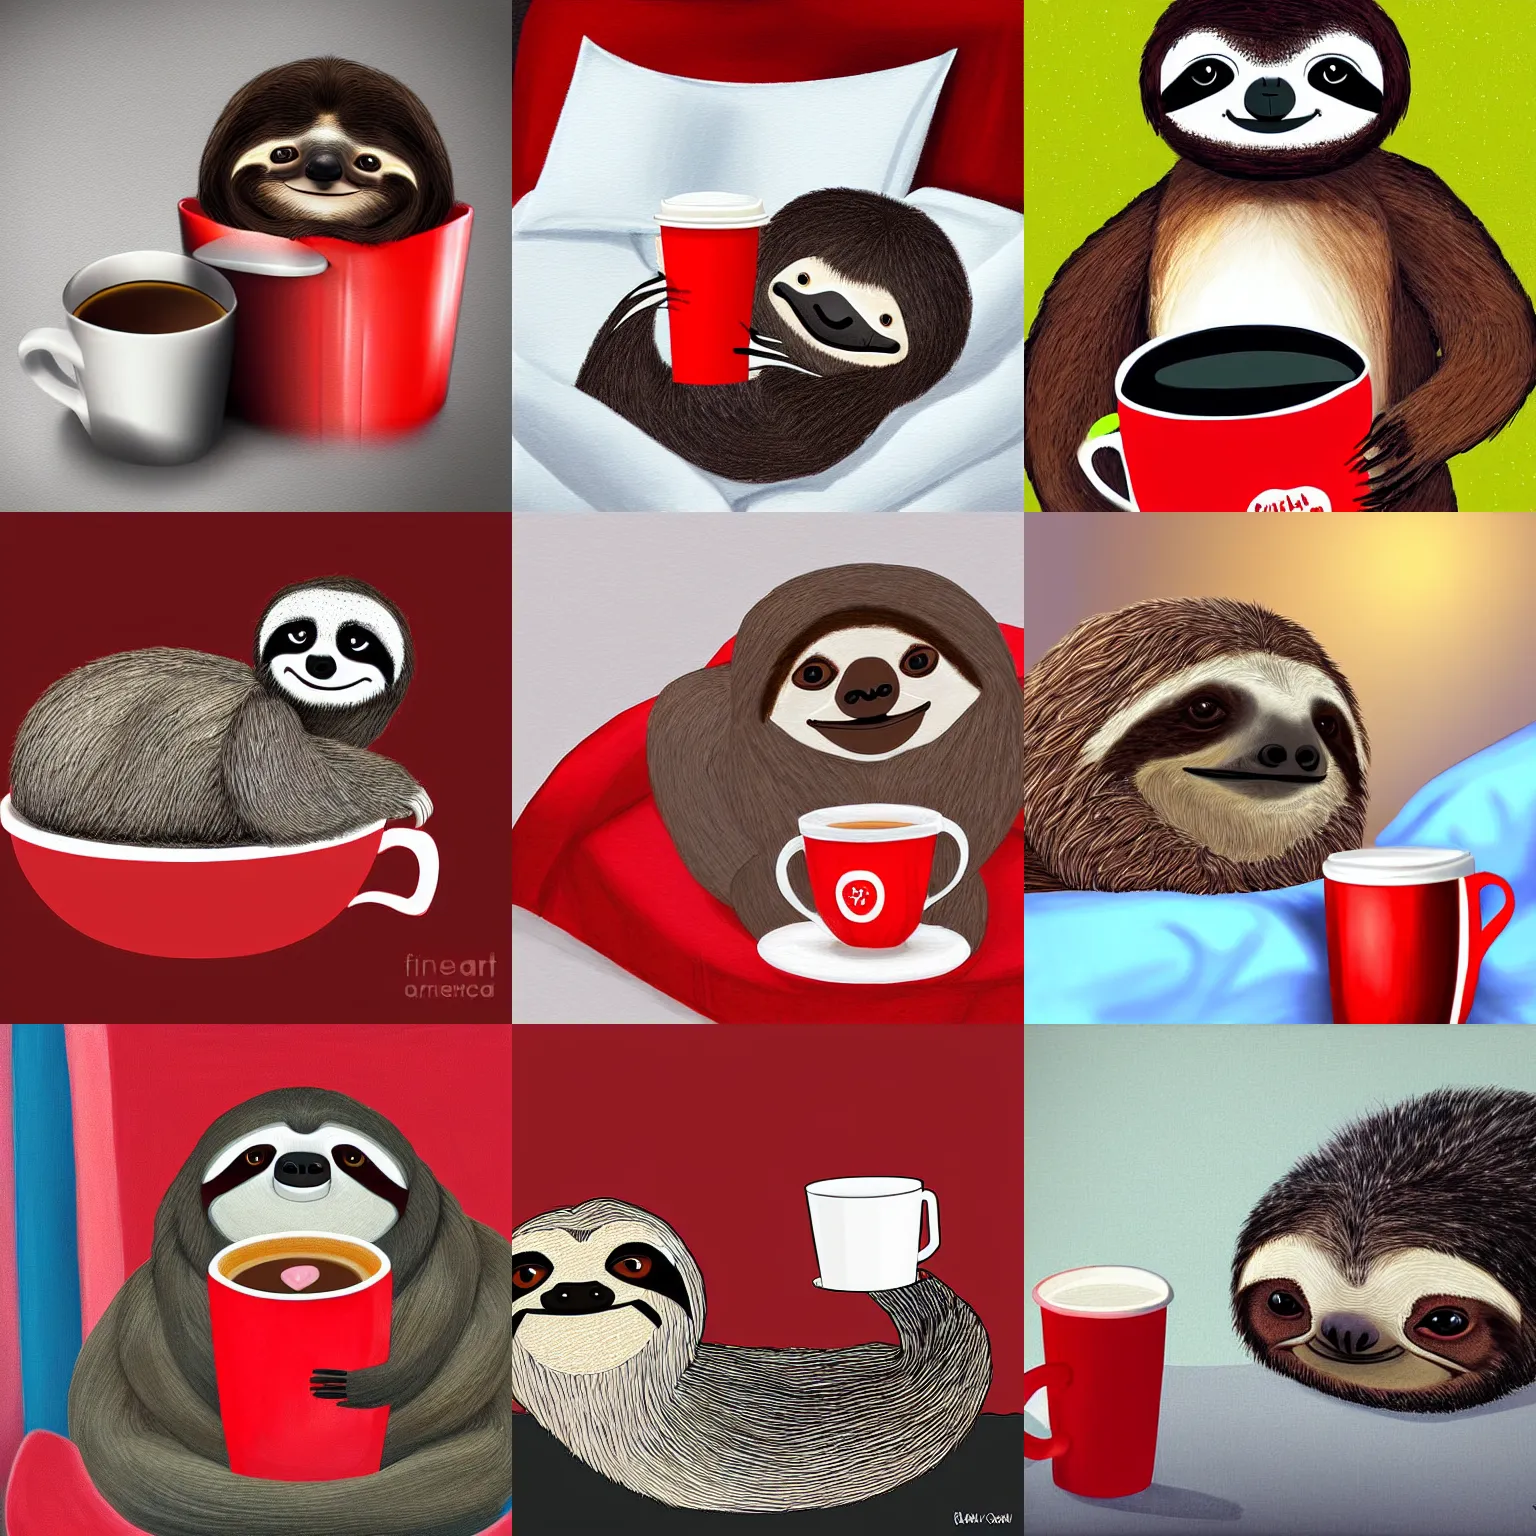 Prompt: a cozy sloth enjoying his morning coffee in bed with a red cup, digital art